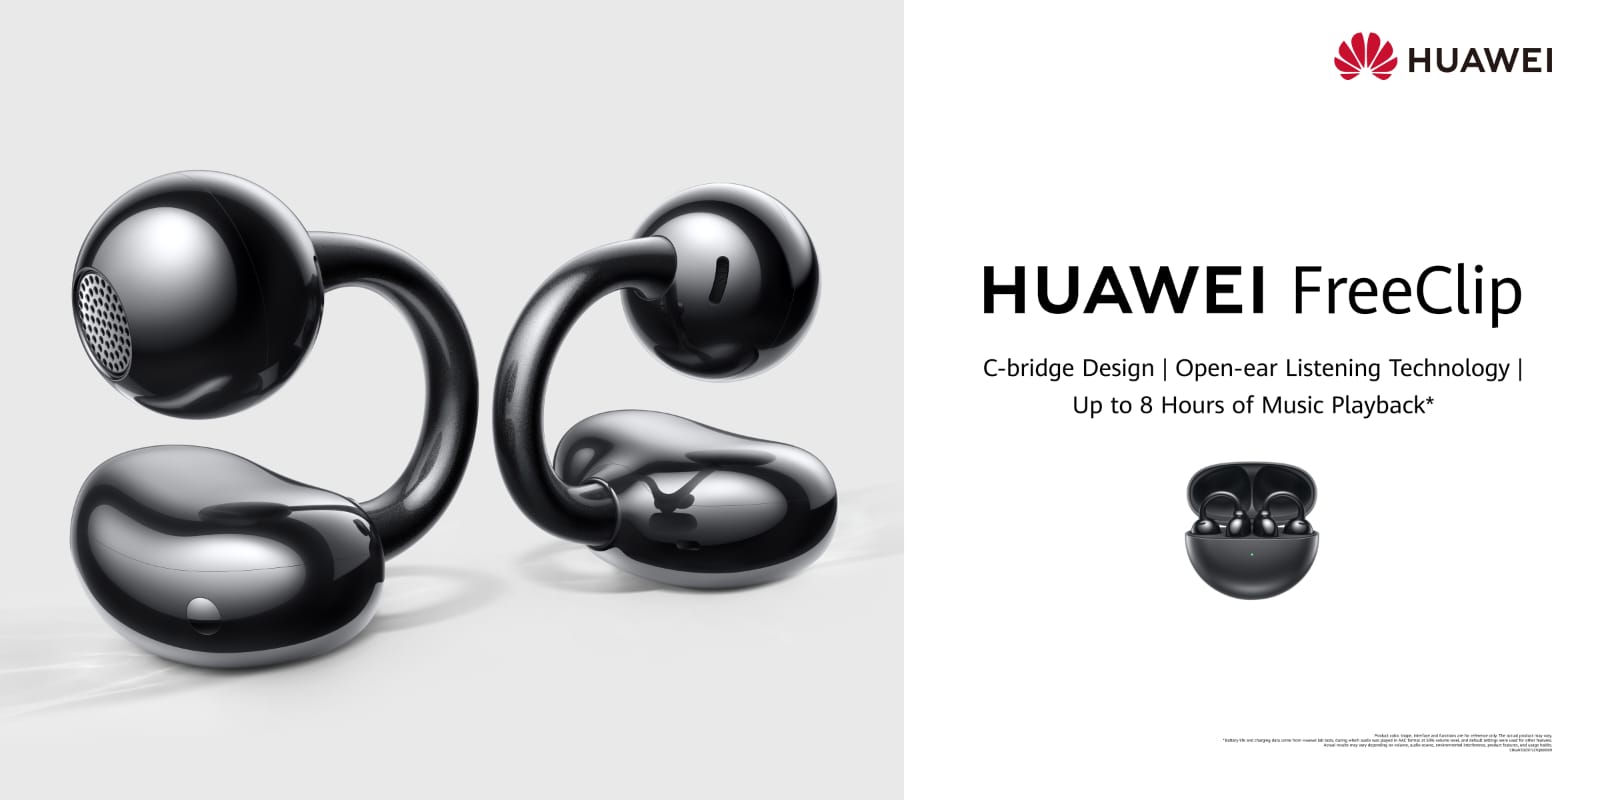 Unleash Your Style and Performance with the HUAWEI FreeClip: The Future of Open-Ear Earbuds